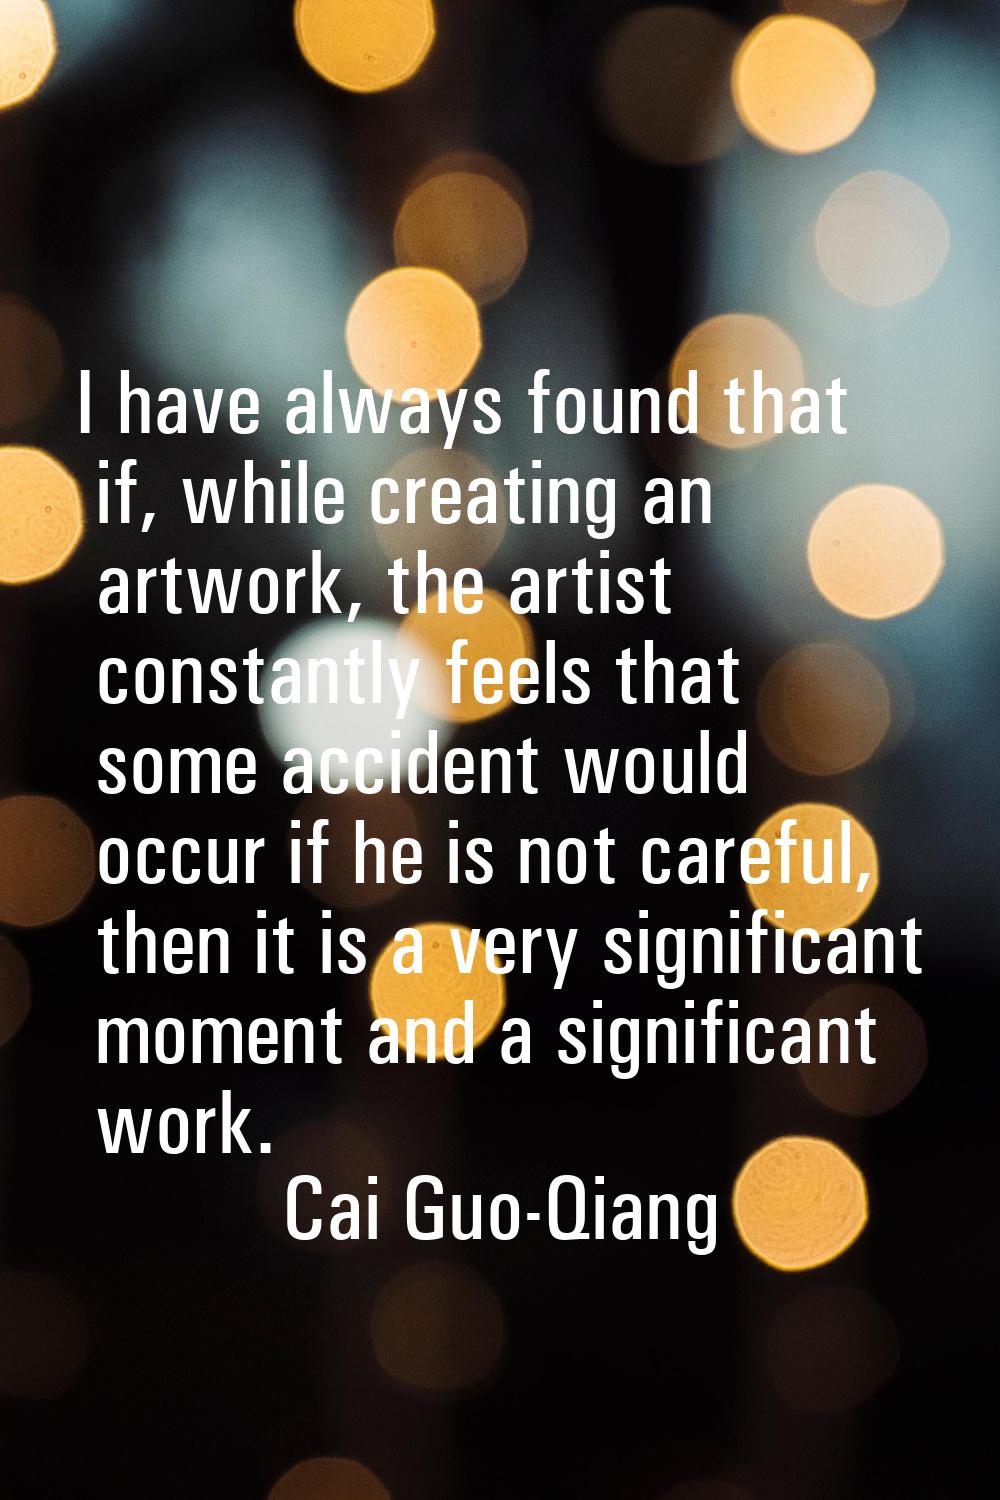 I have always found that if, while creating an artwork, the artist constantly feels that some accid